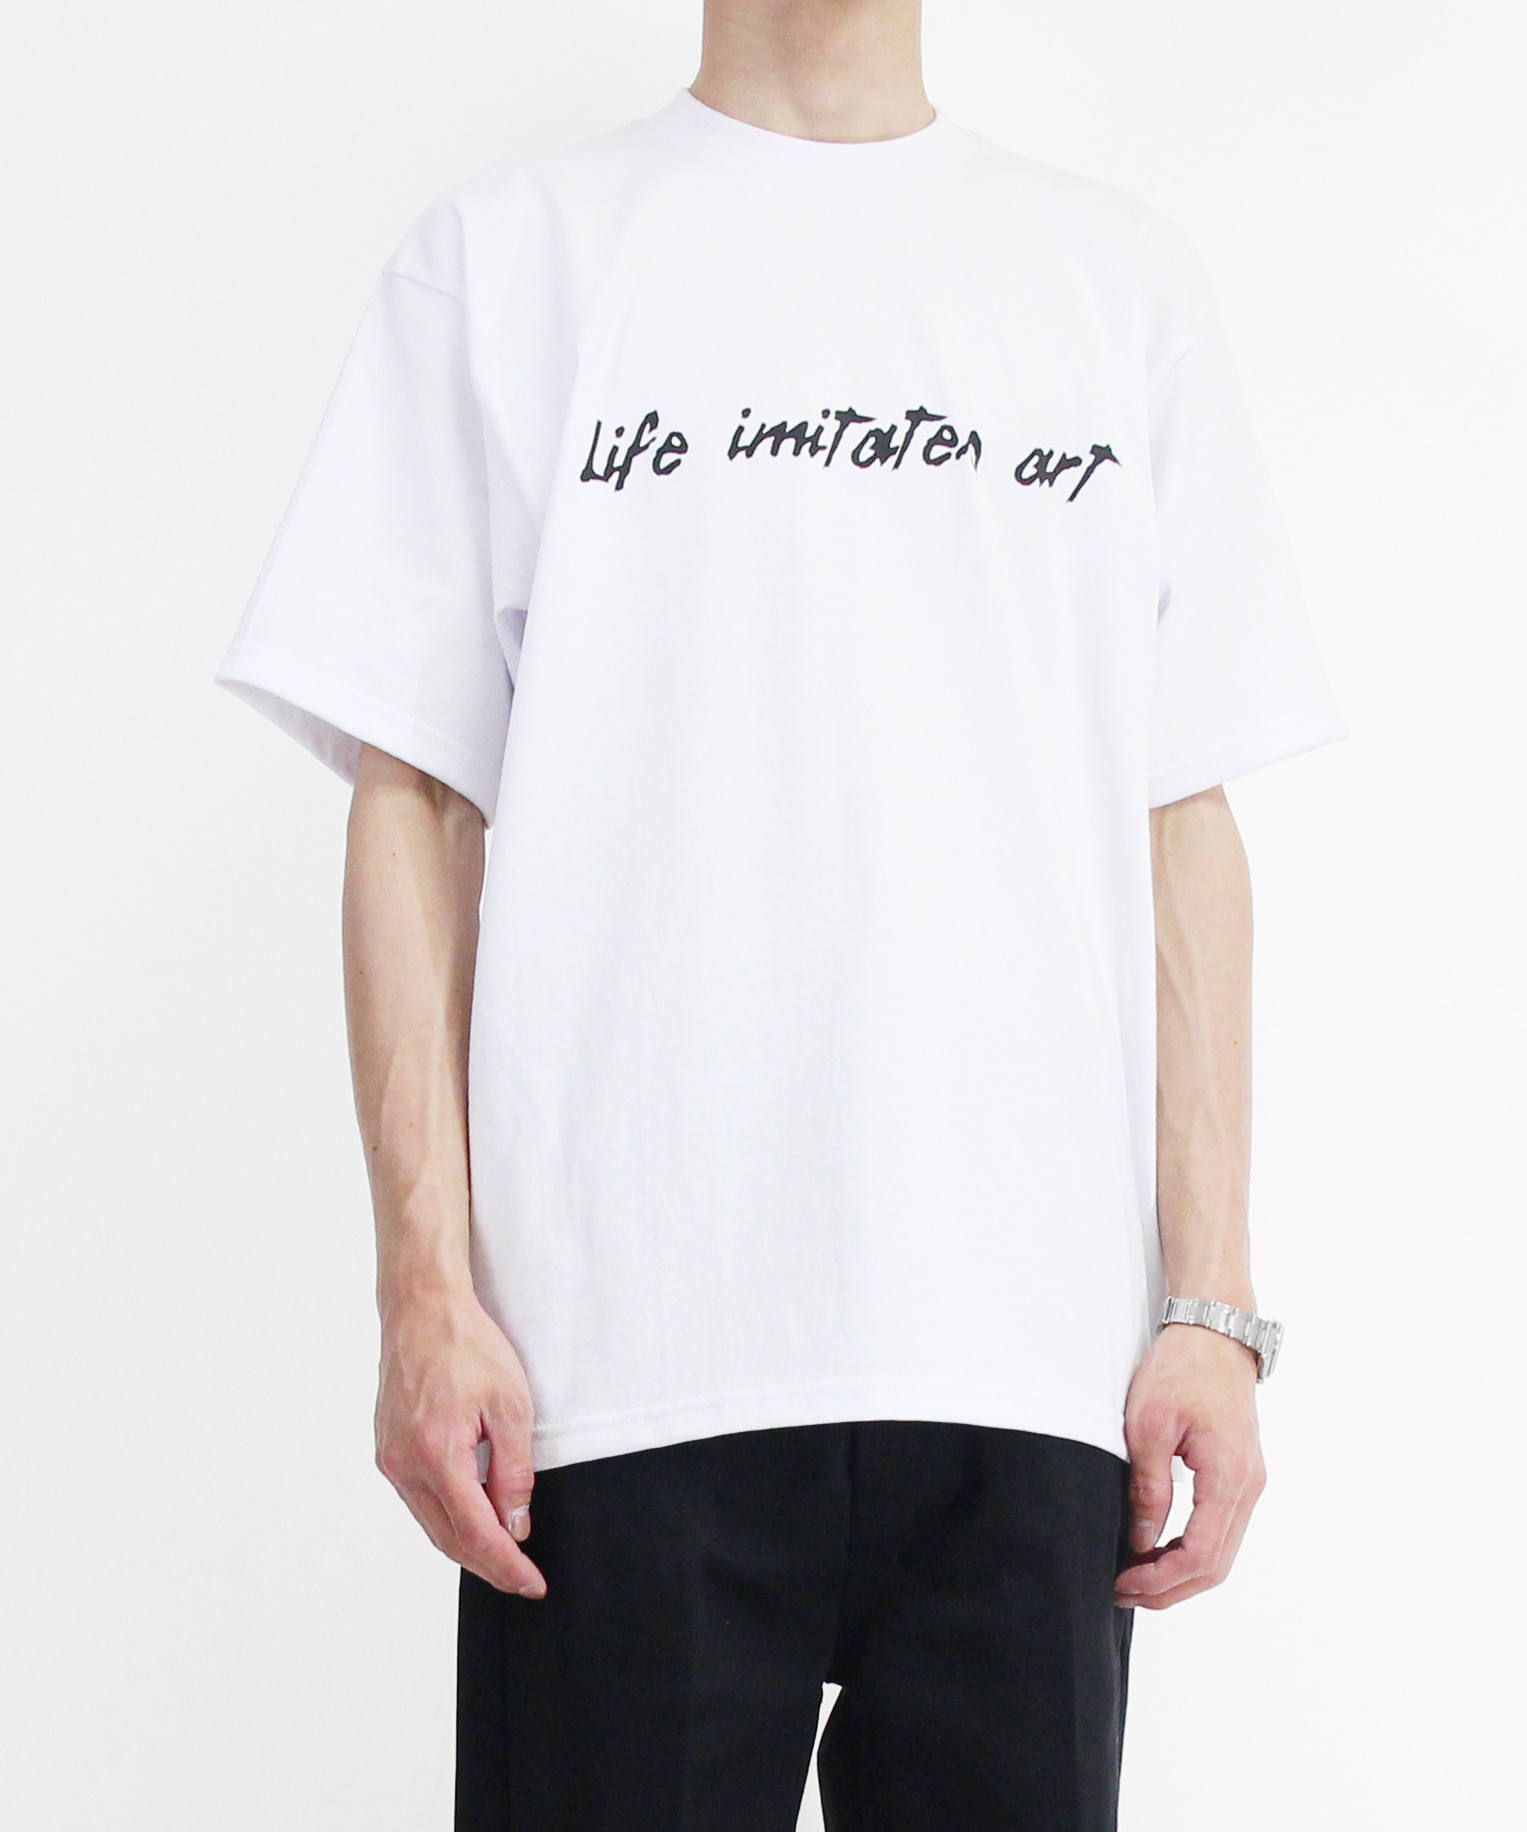 CLANE HOMME - メンズプリントTシャツ - BRUSH WRITING T/S - WHITE ...